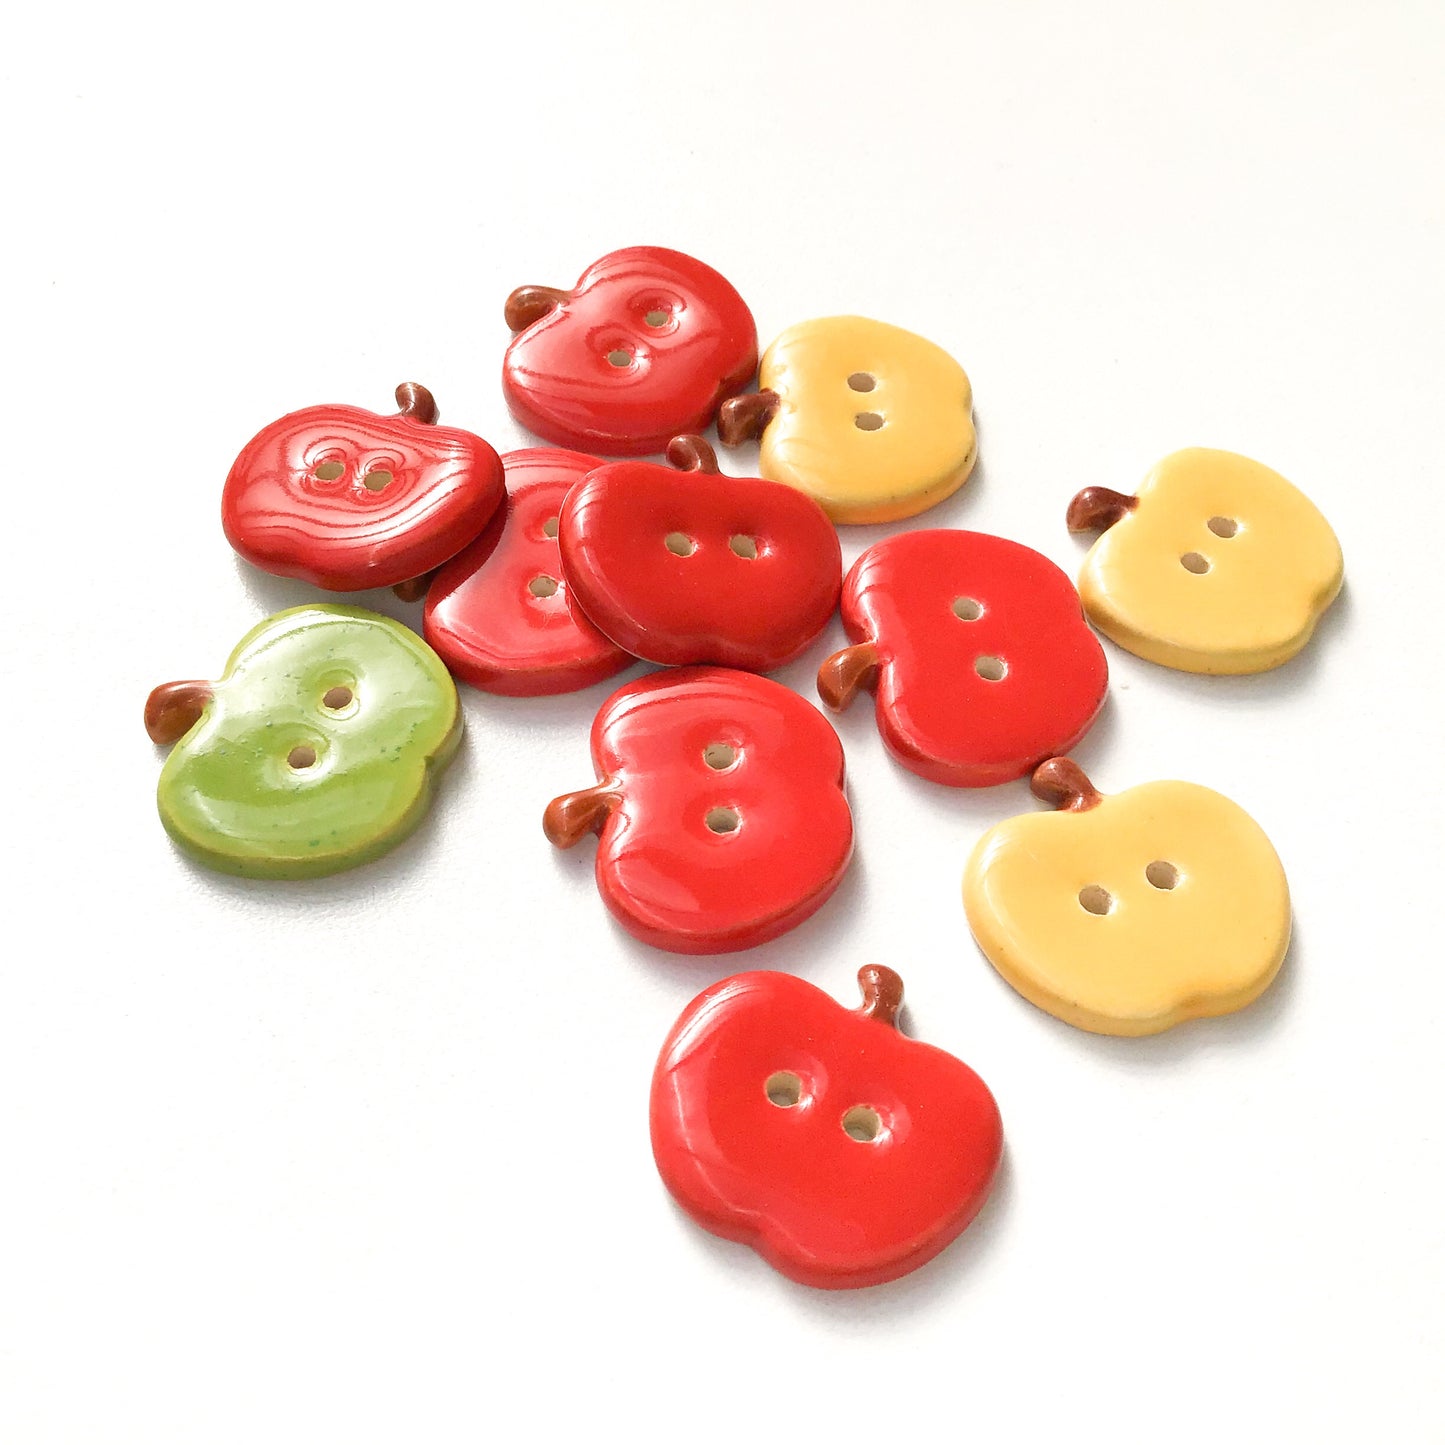 Ceramic Apple Buttons: Red, Yellow, and Green Ceramic Buttons - Clay Apple Buttons (ws-31)